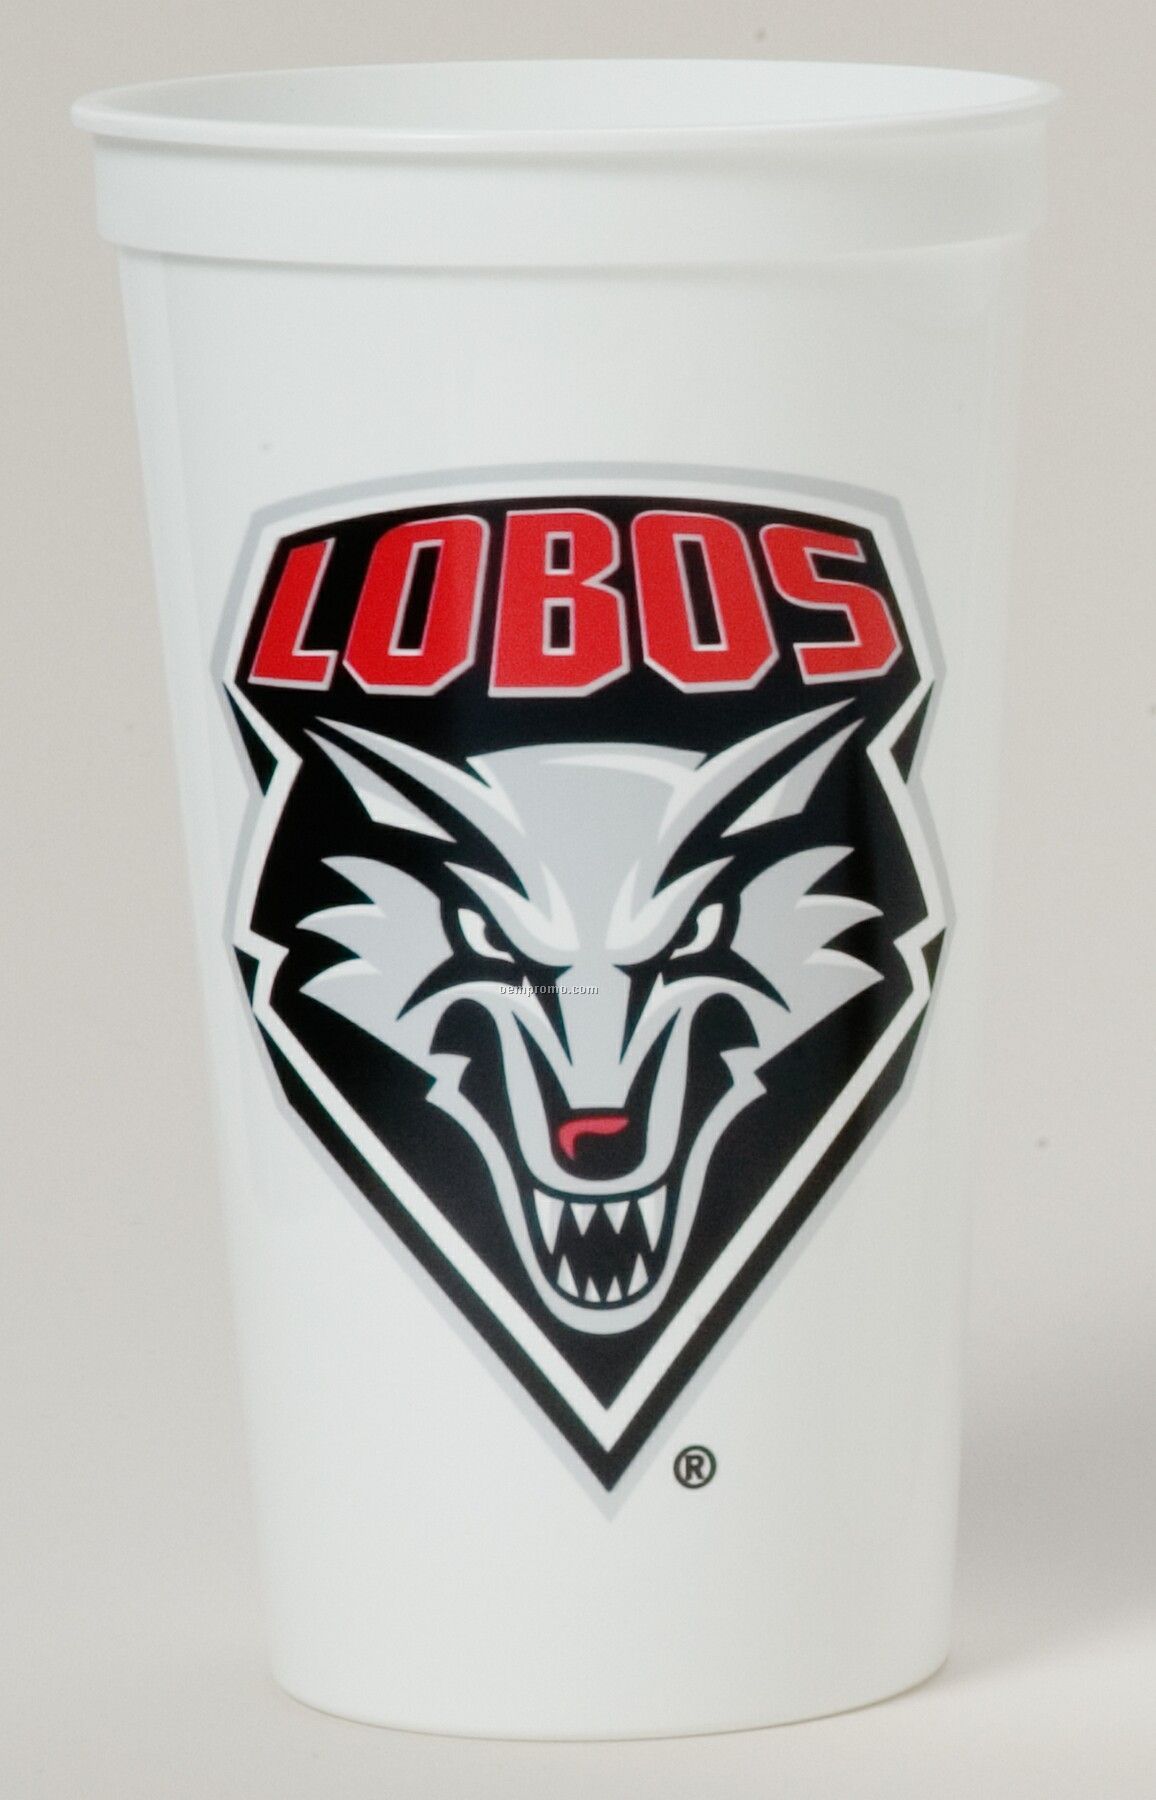 32 Oz. Smooth White Stadium Cup (3 Color Offset Imprint)